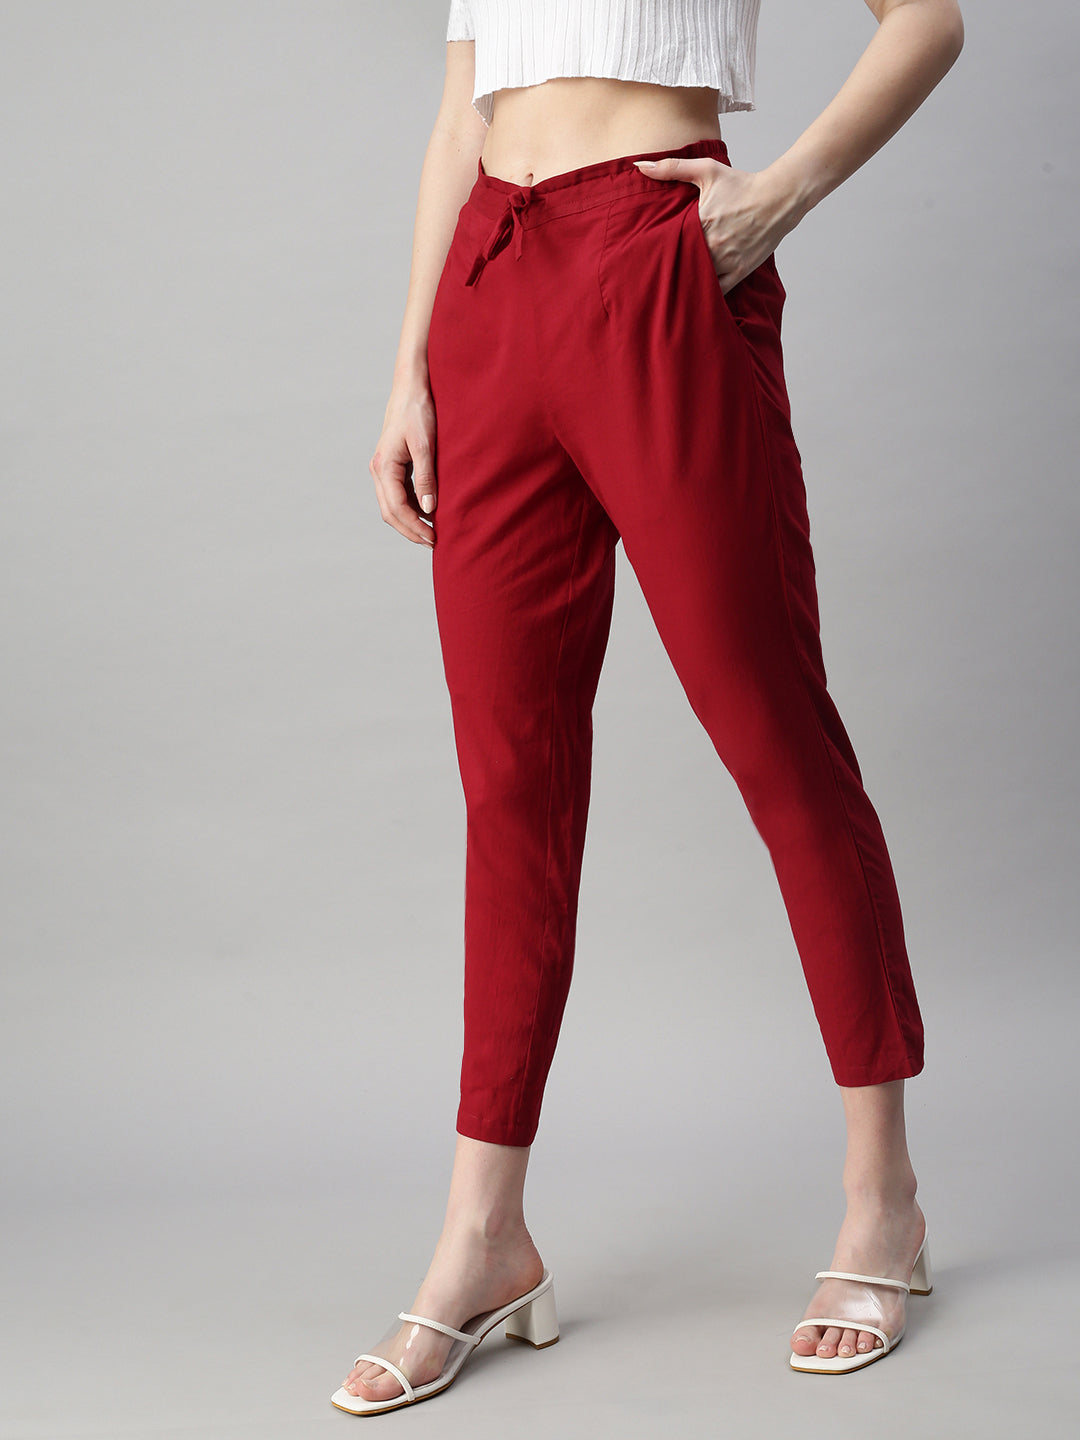 Go Colors Trousers and Pants  Buy Go Colors Women Dark Wine Chinos Trousers  Online  Nykaa Fashion